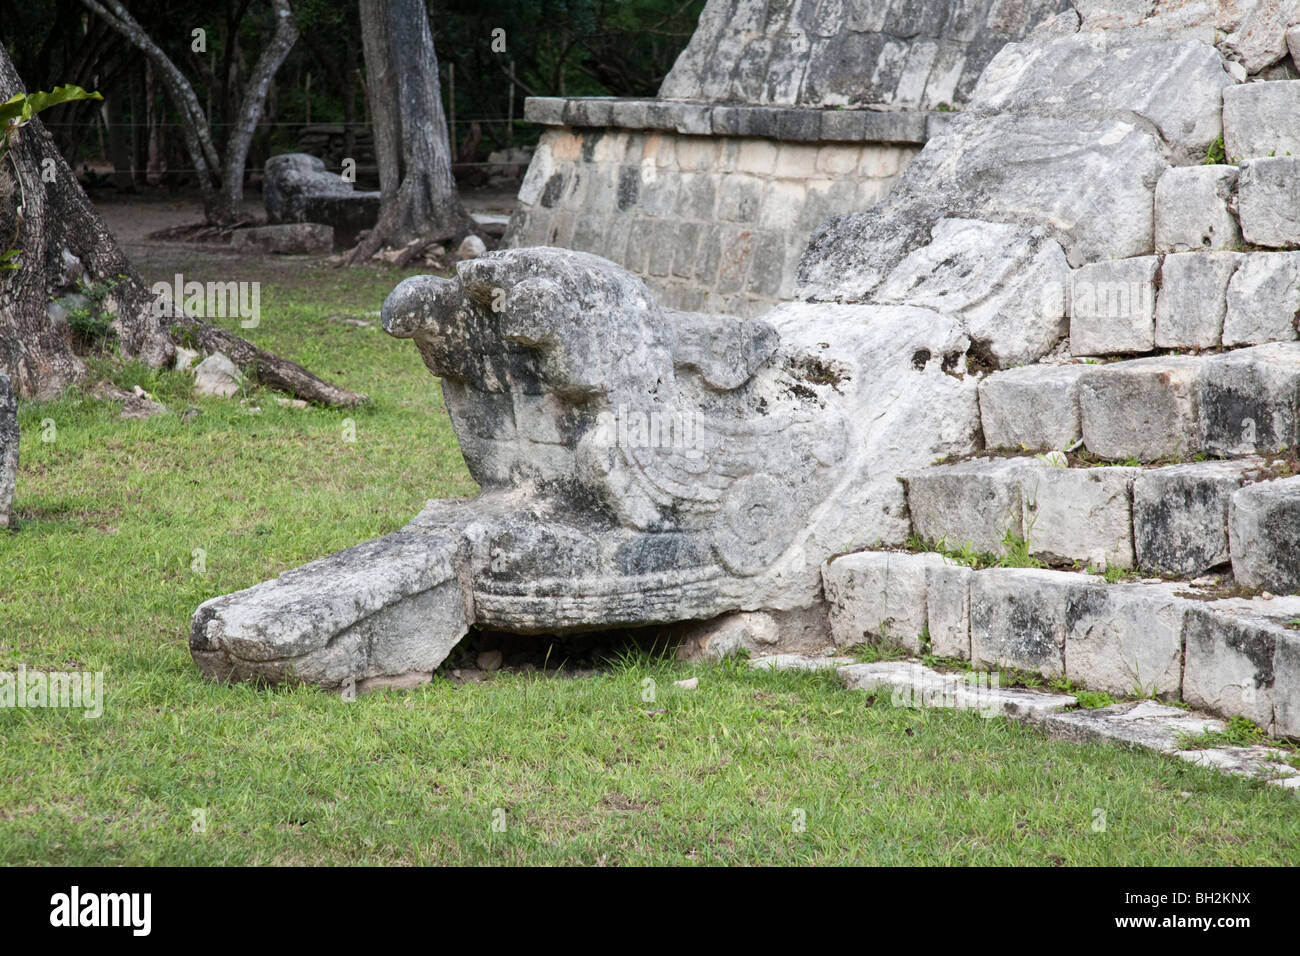 The Ossuary or Tomb Of The Great Priest, Chichen Itza Archaeological Site Yucatan Mexico. Stock Photo